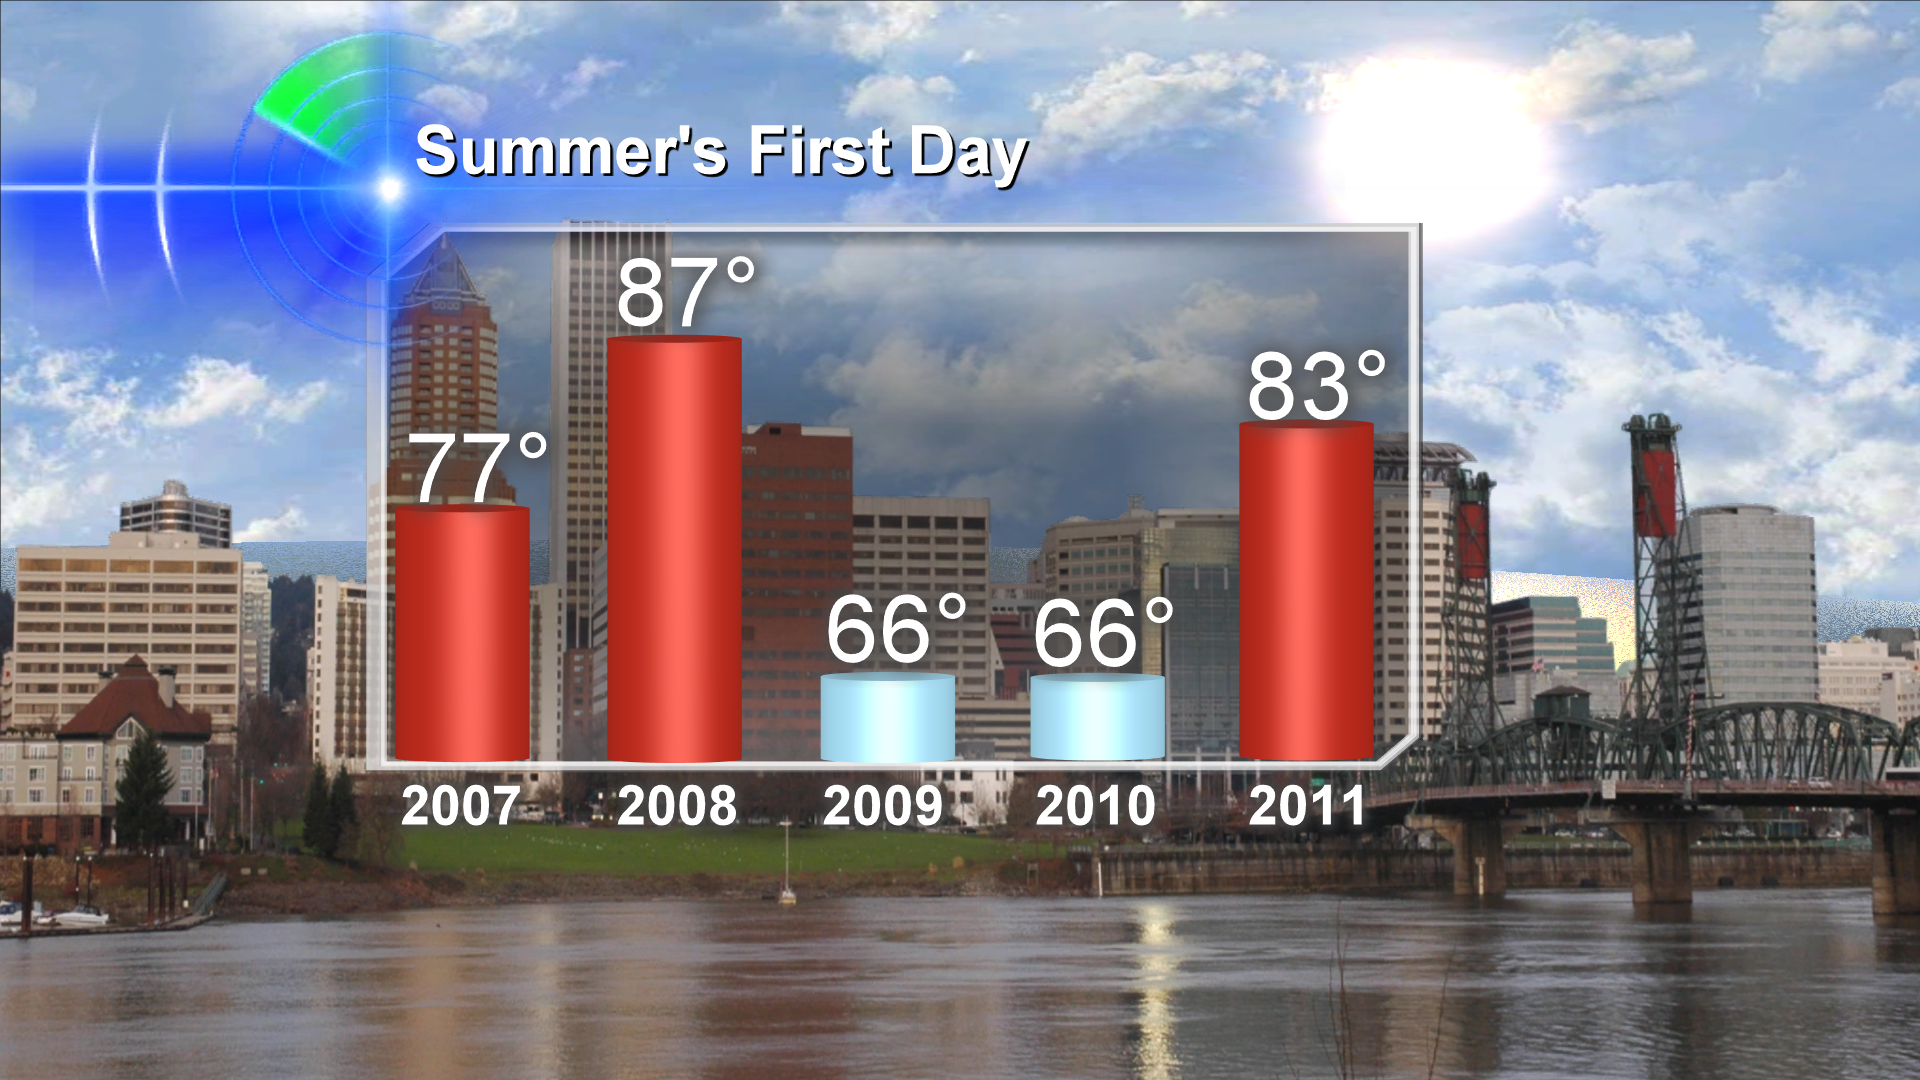 One Impressive Fact About The First Day Of Summer In Portland